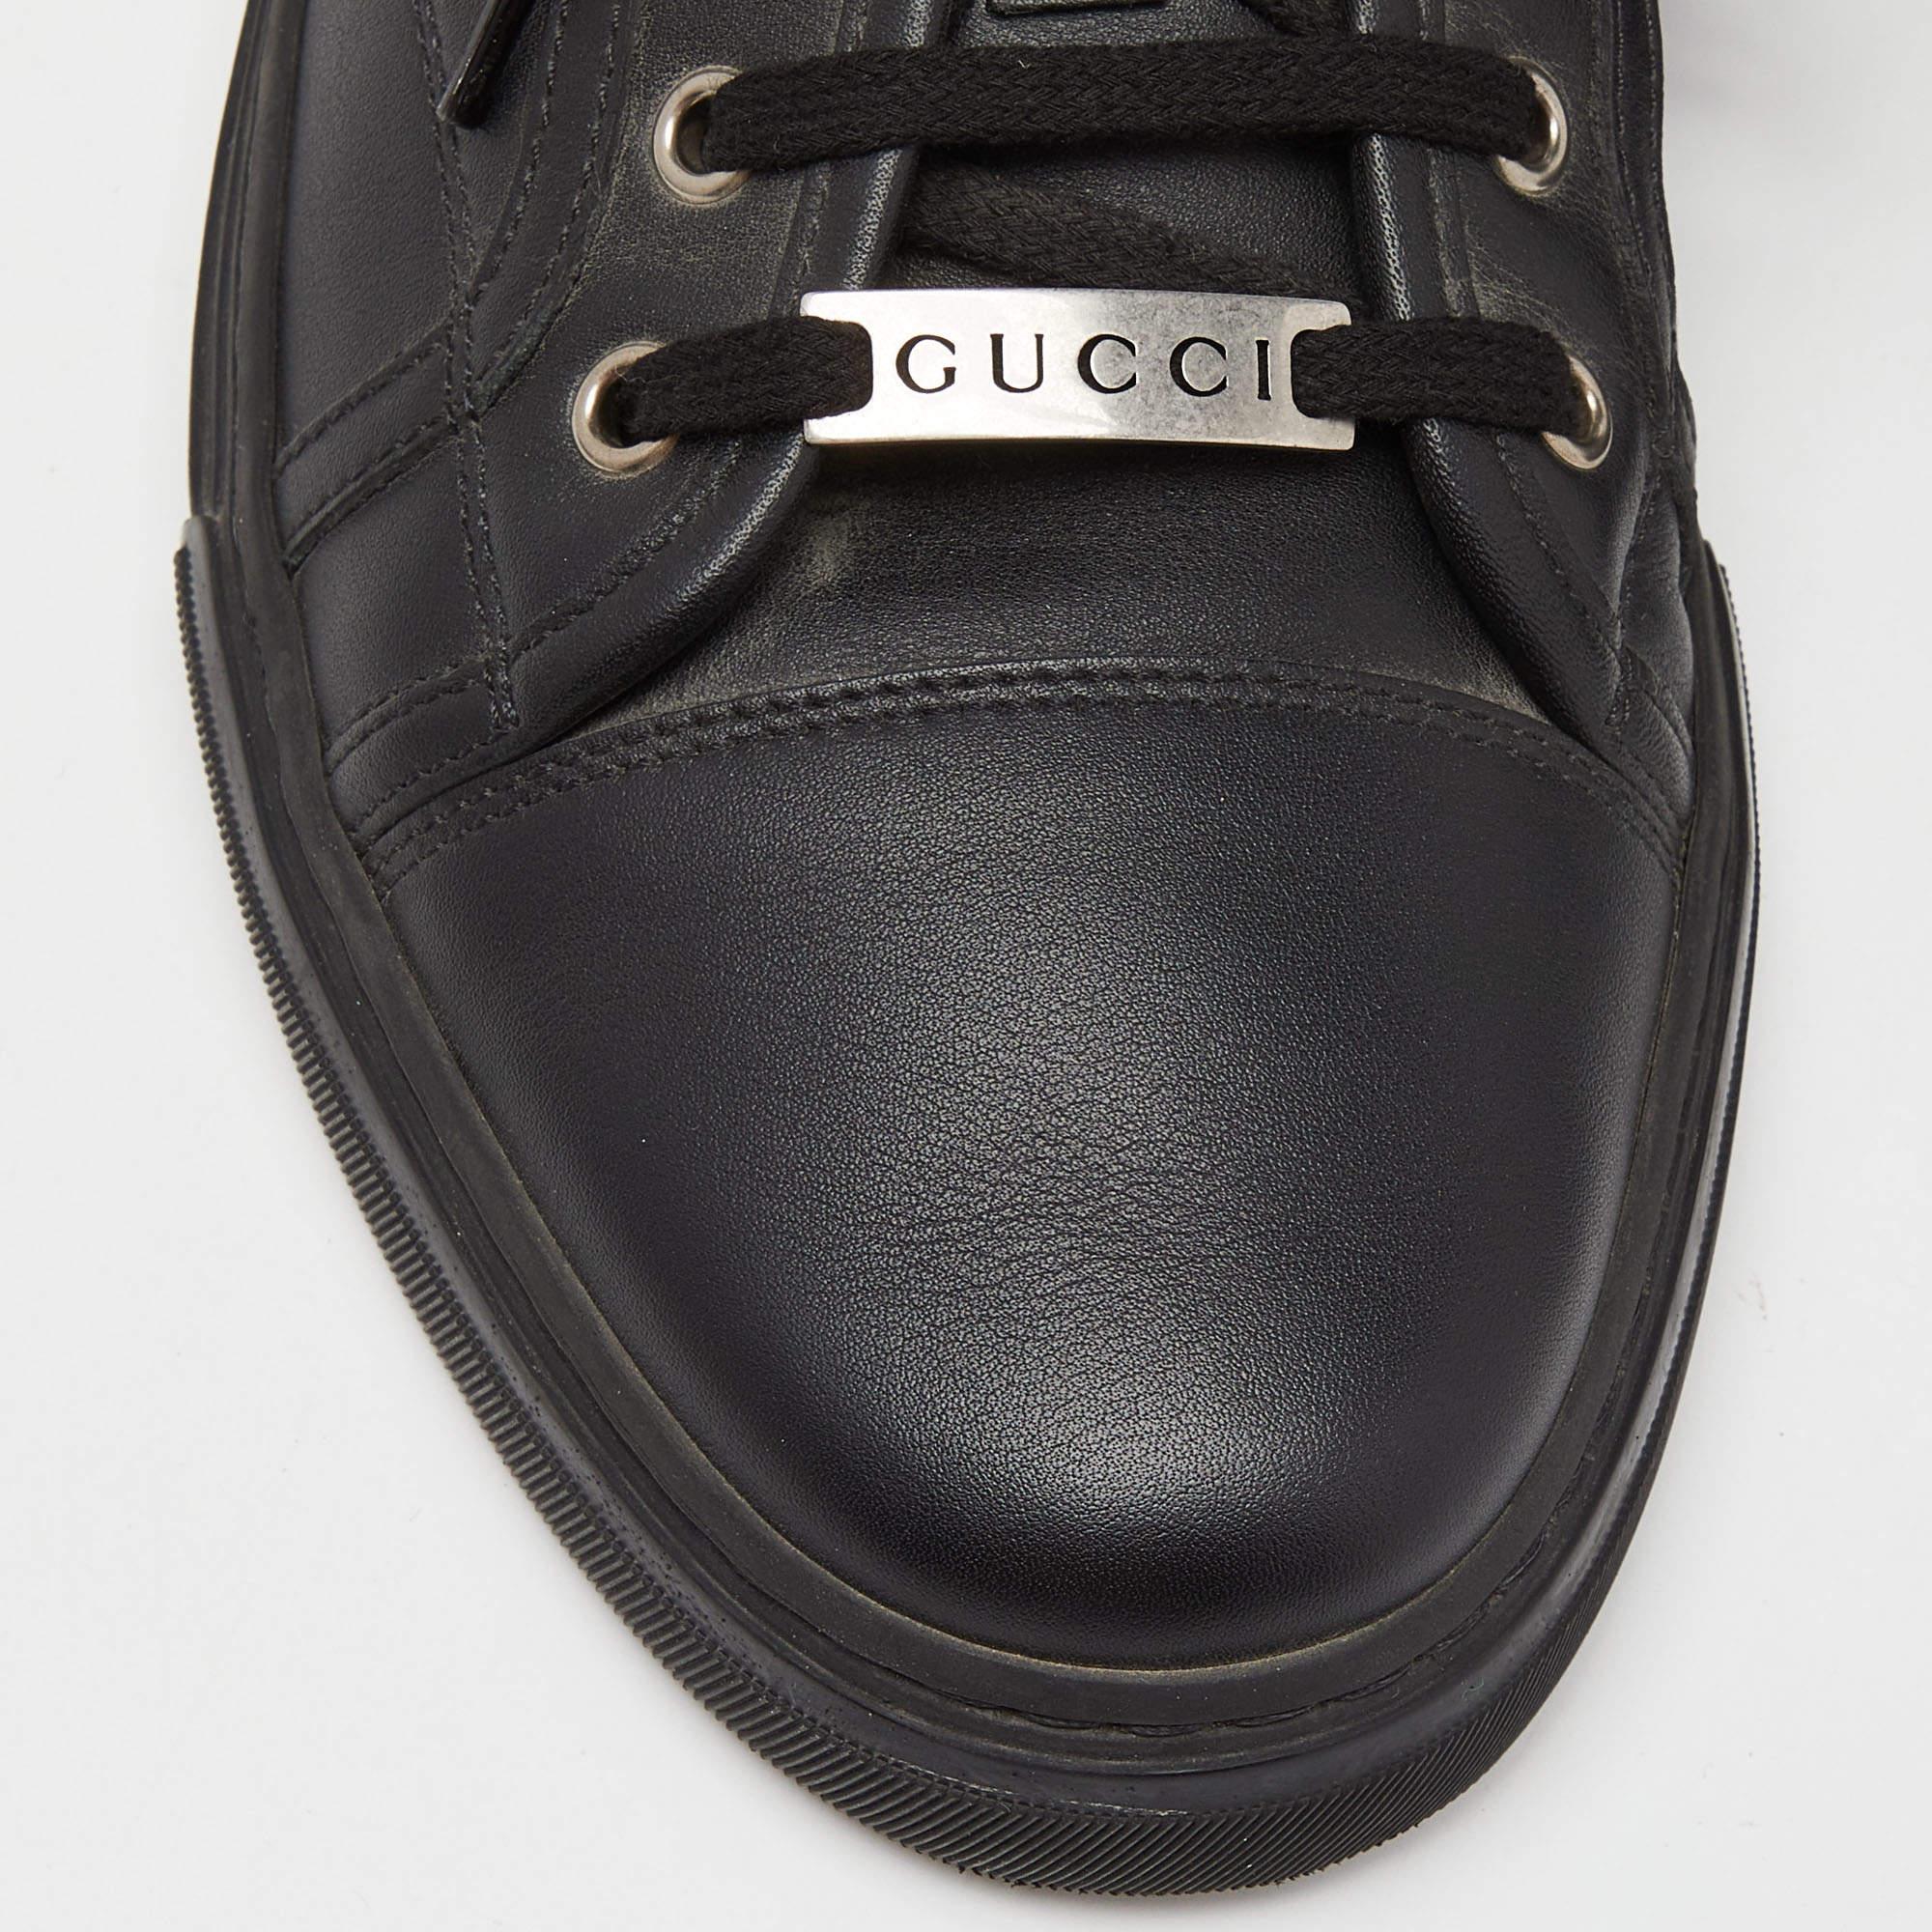 Gucci Black Leather Low Top Sneakers Size 43 2